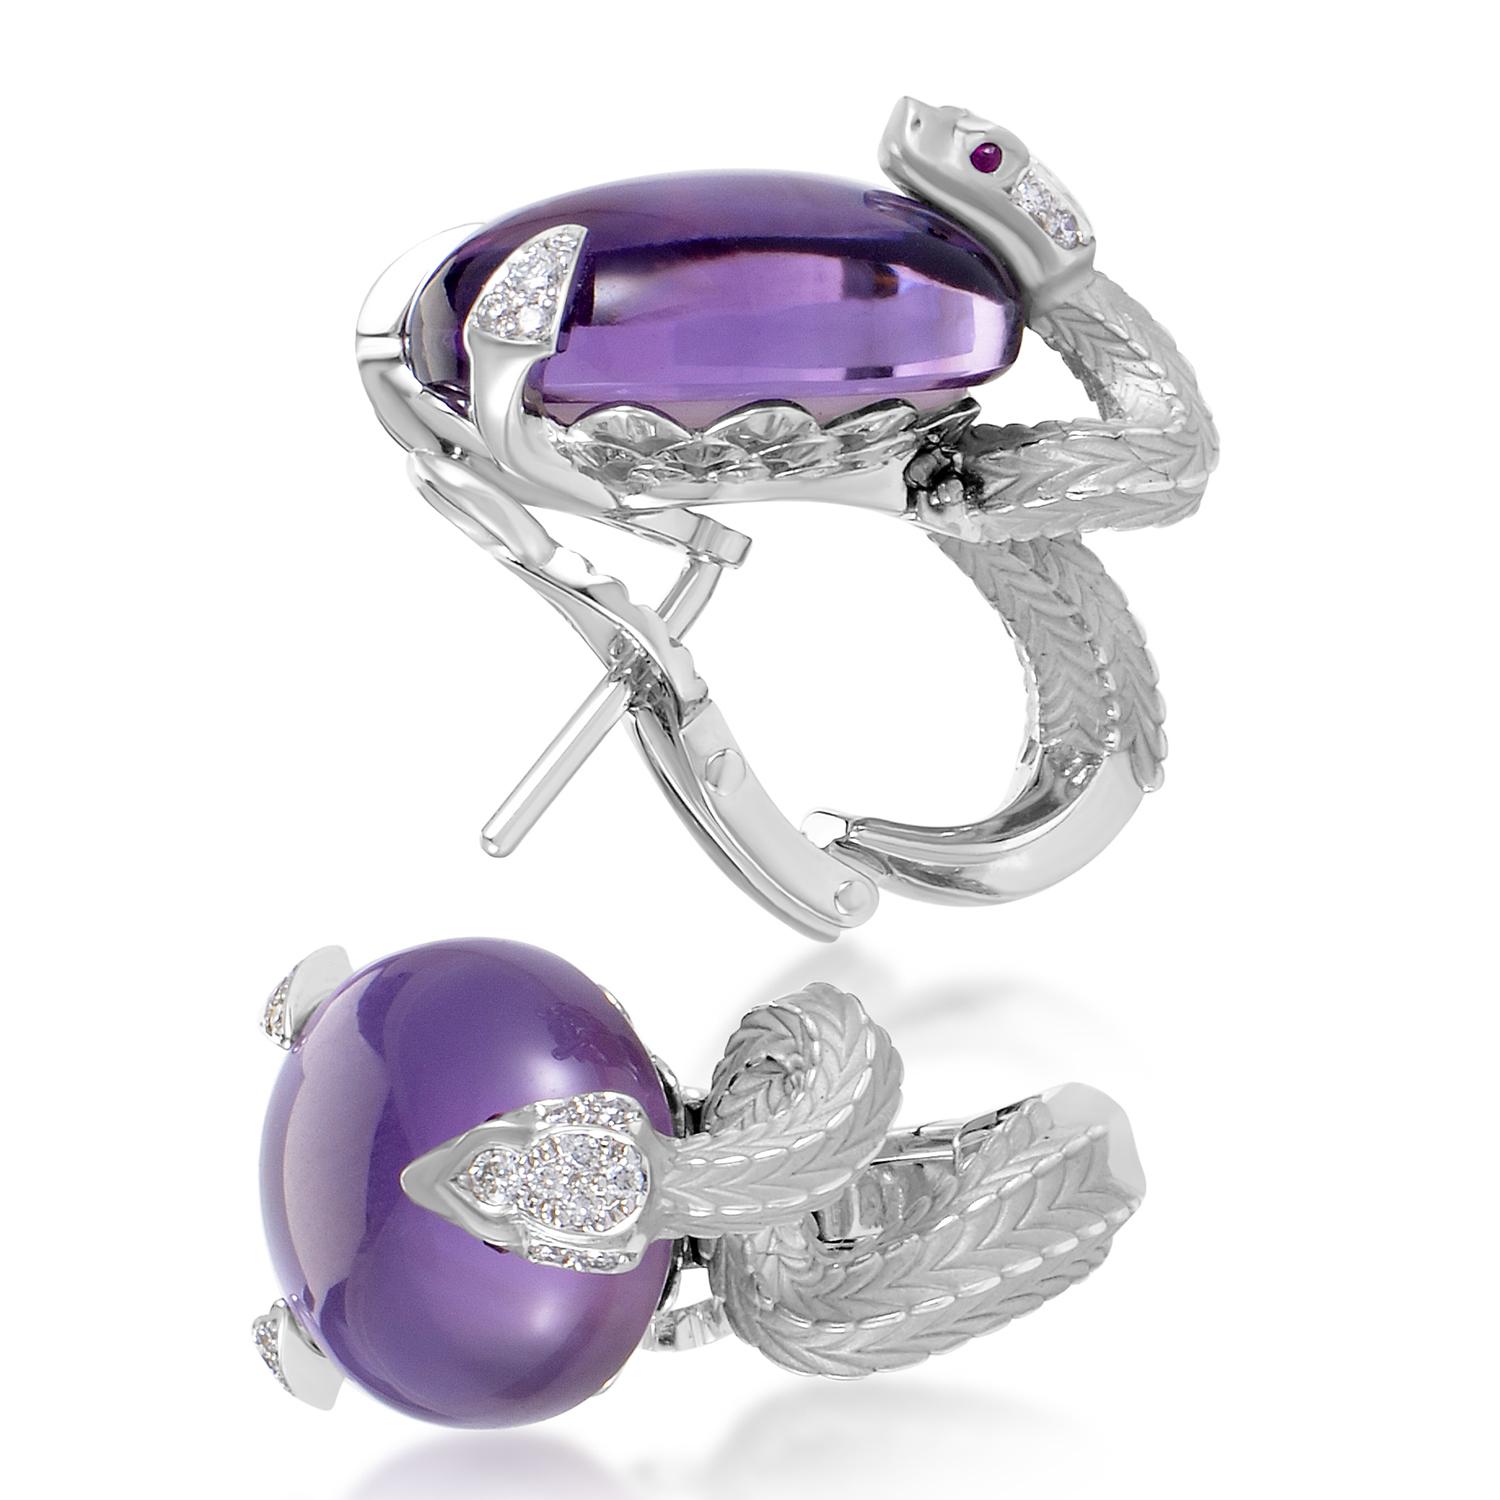 Guarded by two marvelous snakes presented in shimmering 18K white gold and embellished with glistening diamonds weighing in total 0.26ct as well as pink sapphire eyes totaling 0.04ct, the charming amethysts weighing in total 3.00 carats are placed